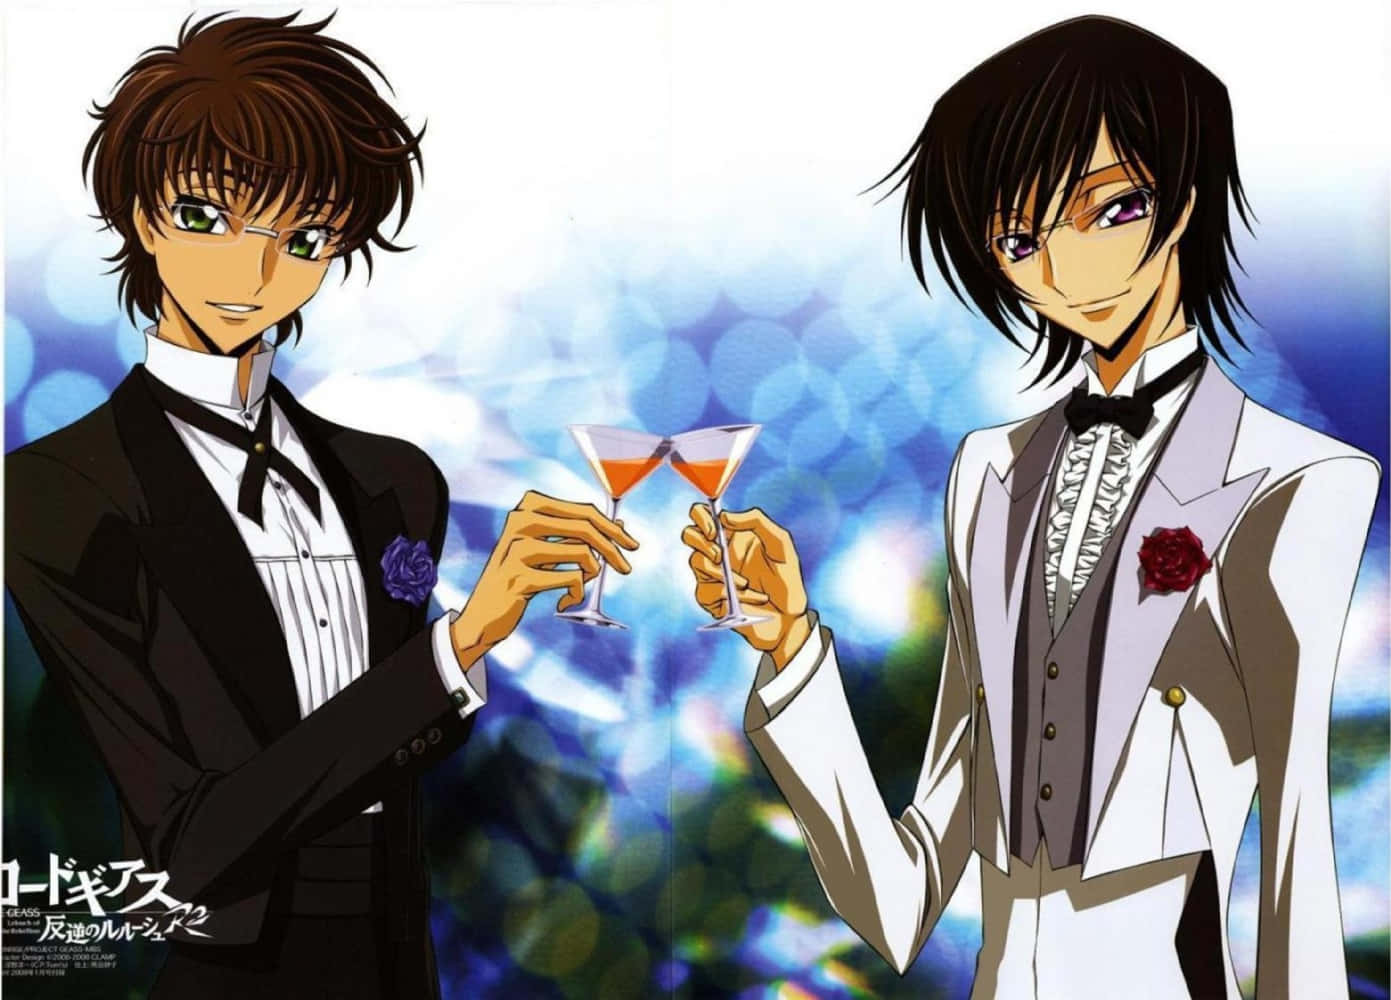 Rolo Lamperouge striking a pose with Geass in his eye, from the popular anime, Code Geass. Wallpaper